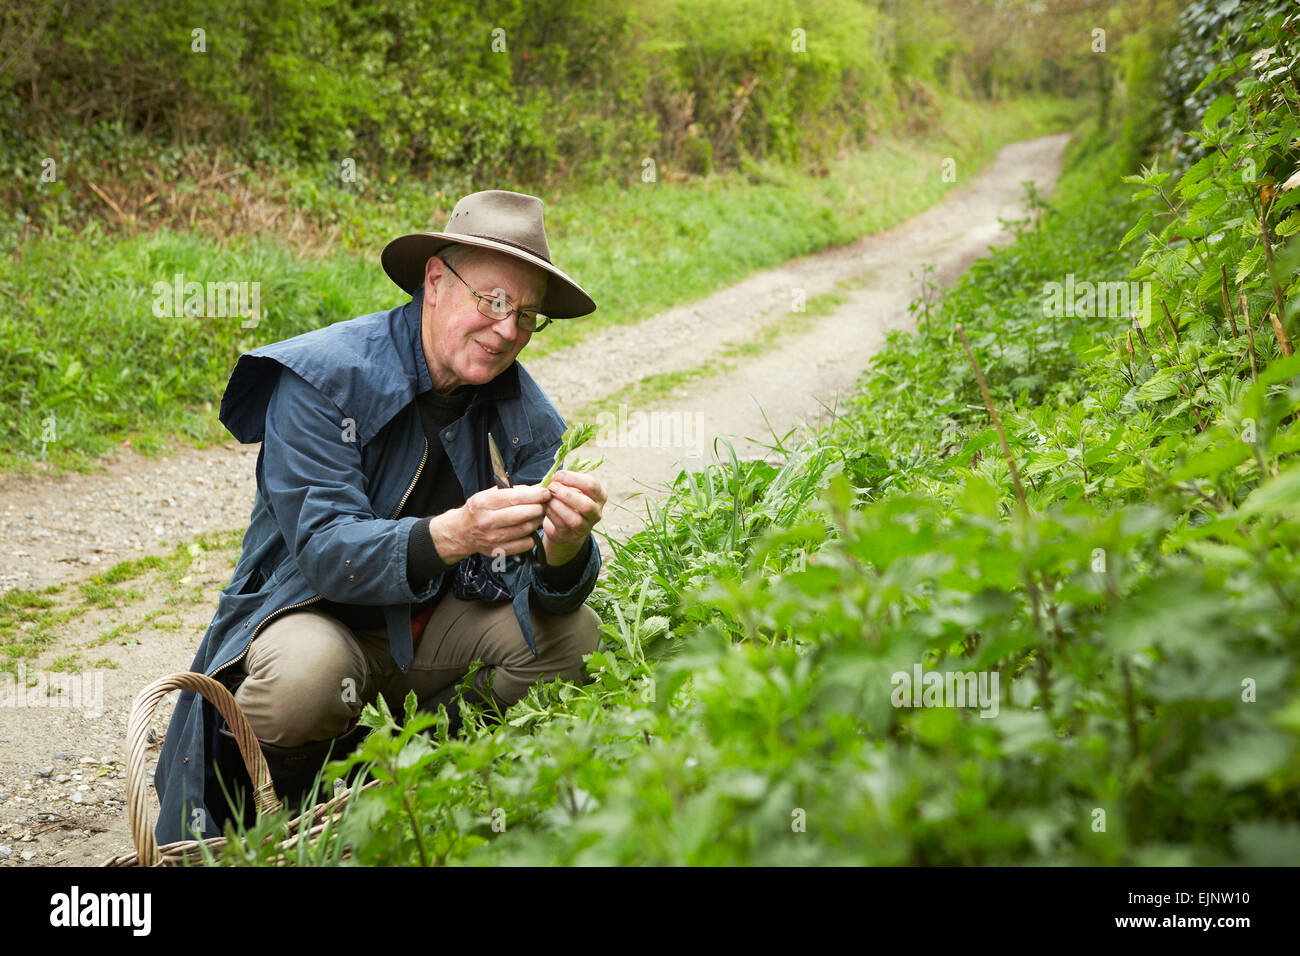 A man in a long coat and boots foraging for edible and tasty plants in the hedgerow. Stock Photo